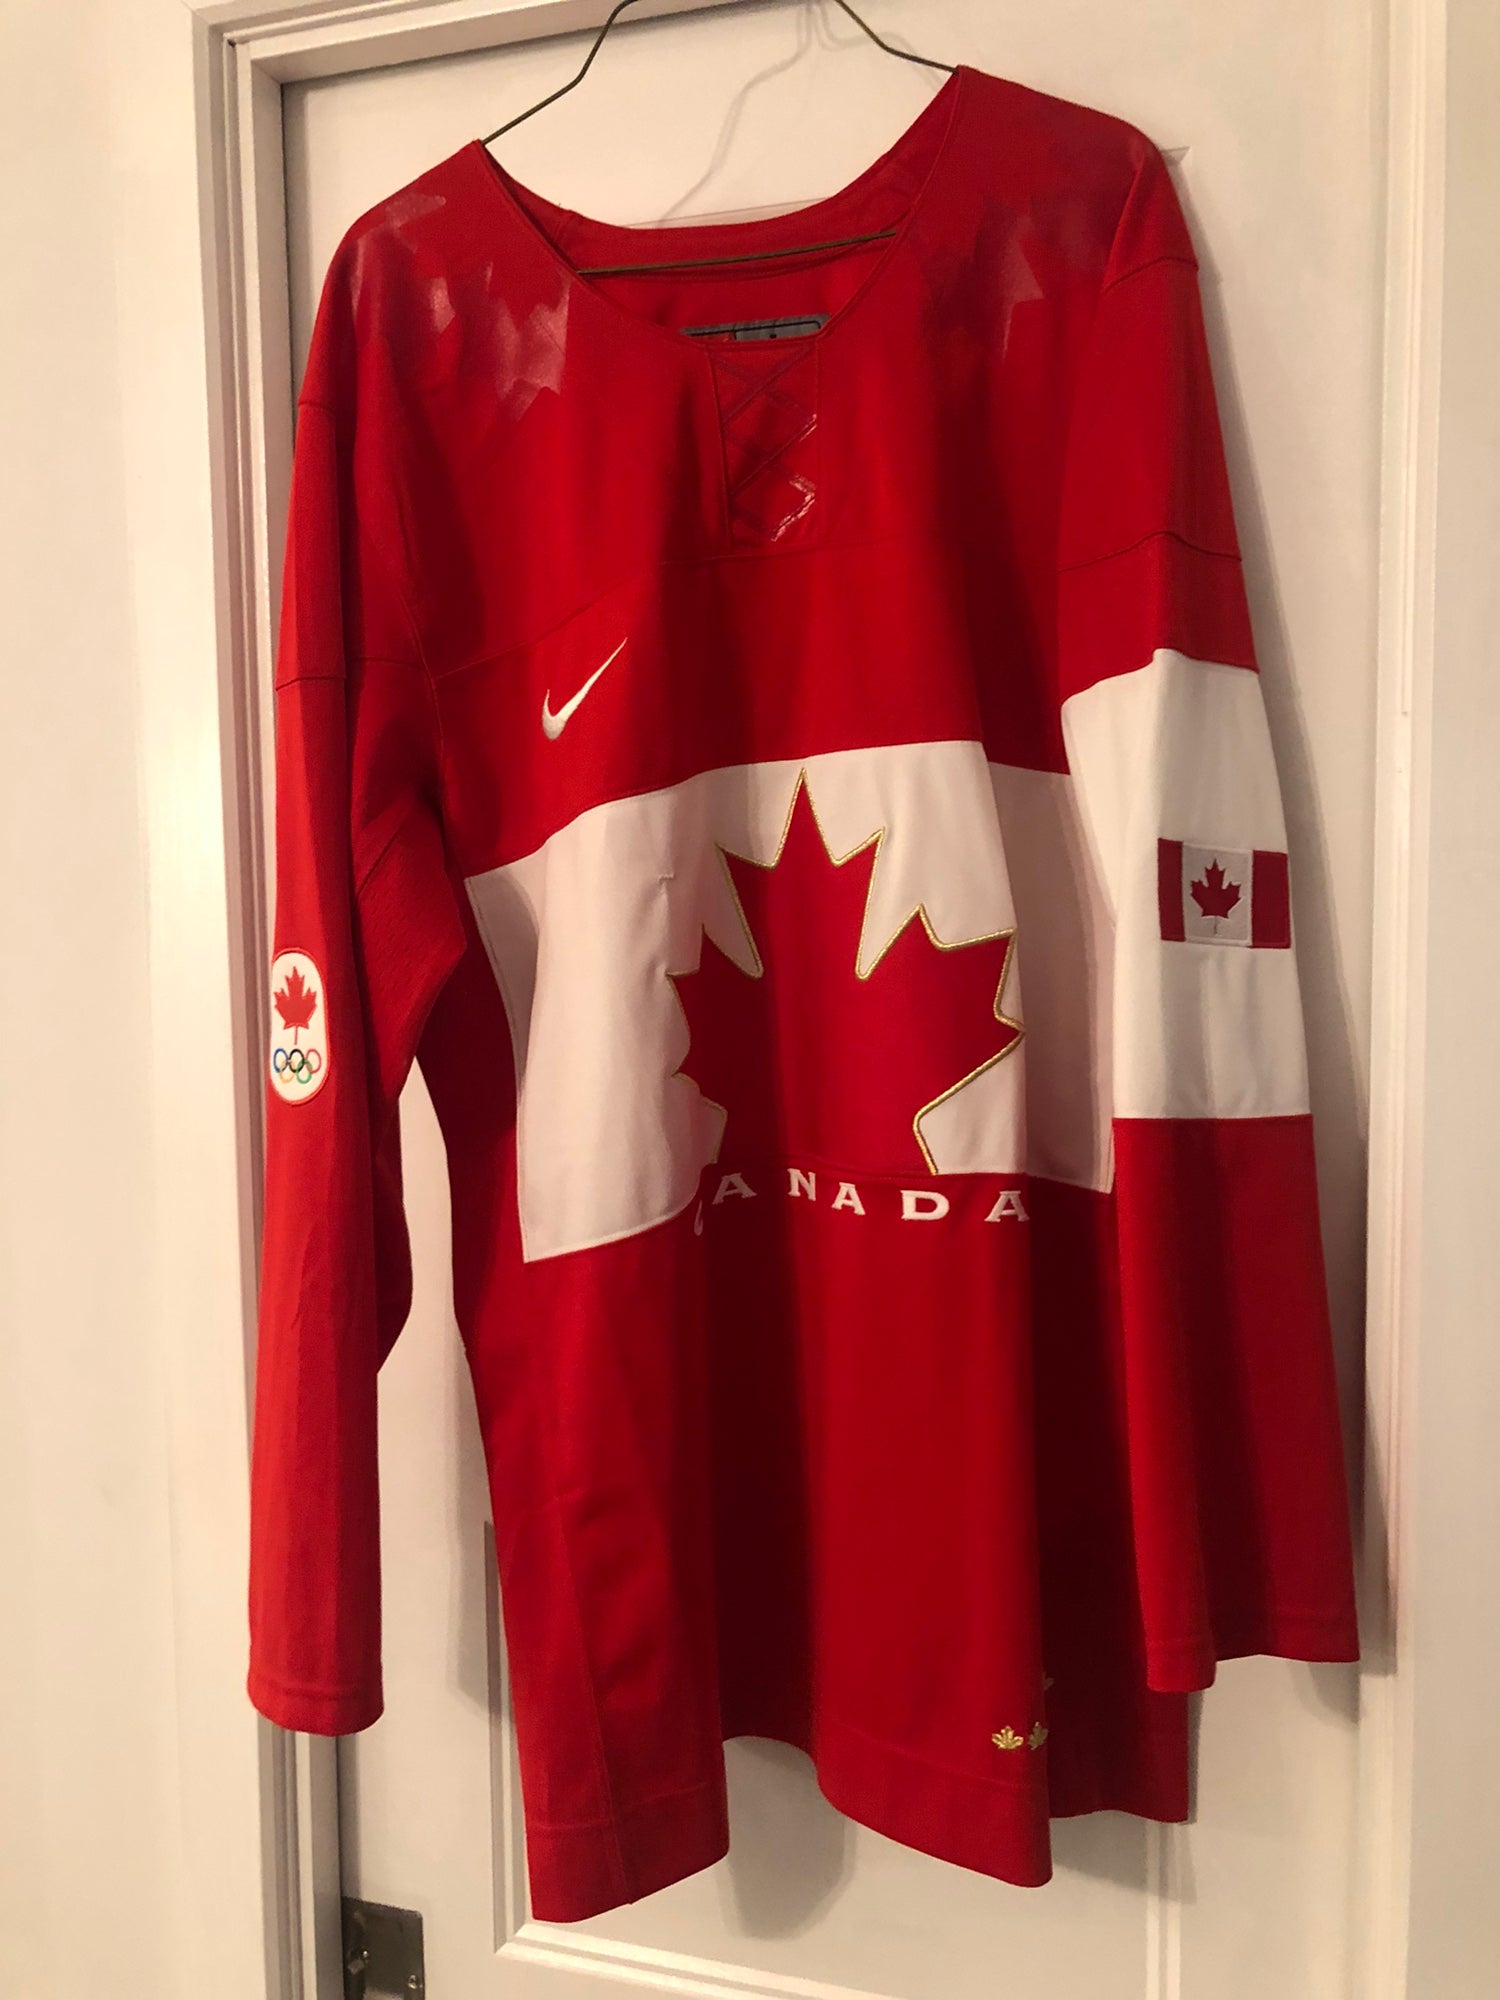 Team Canada 2014 Sochi Olympic Jersey Charity Auction